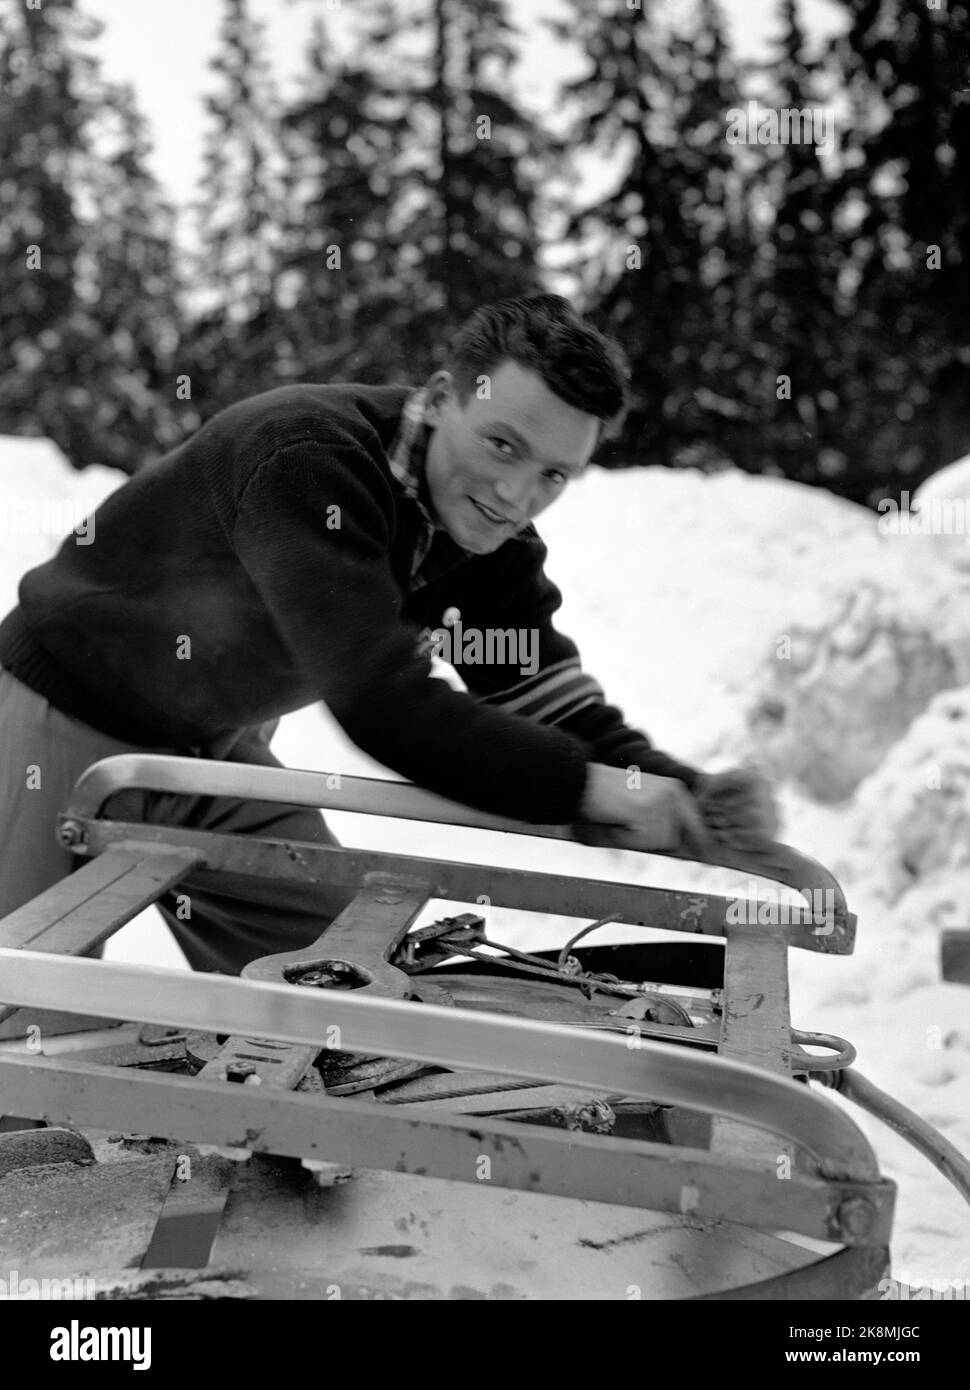 Oslo, Frognerseteren January 1951. The Bobsleigh course, which will be built for the Olympic Winter Games next winter, is ready for test driving. Here is one of the participants in the trial race in the process of preparing the doughs on their Bob. Photo: Skotaam and Kjus / Current / NTB Stock Photo